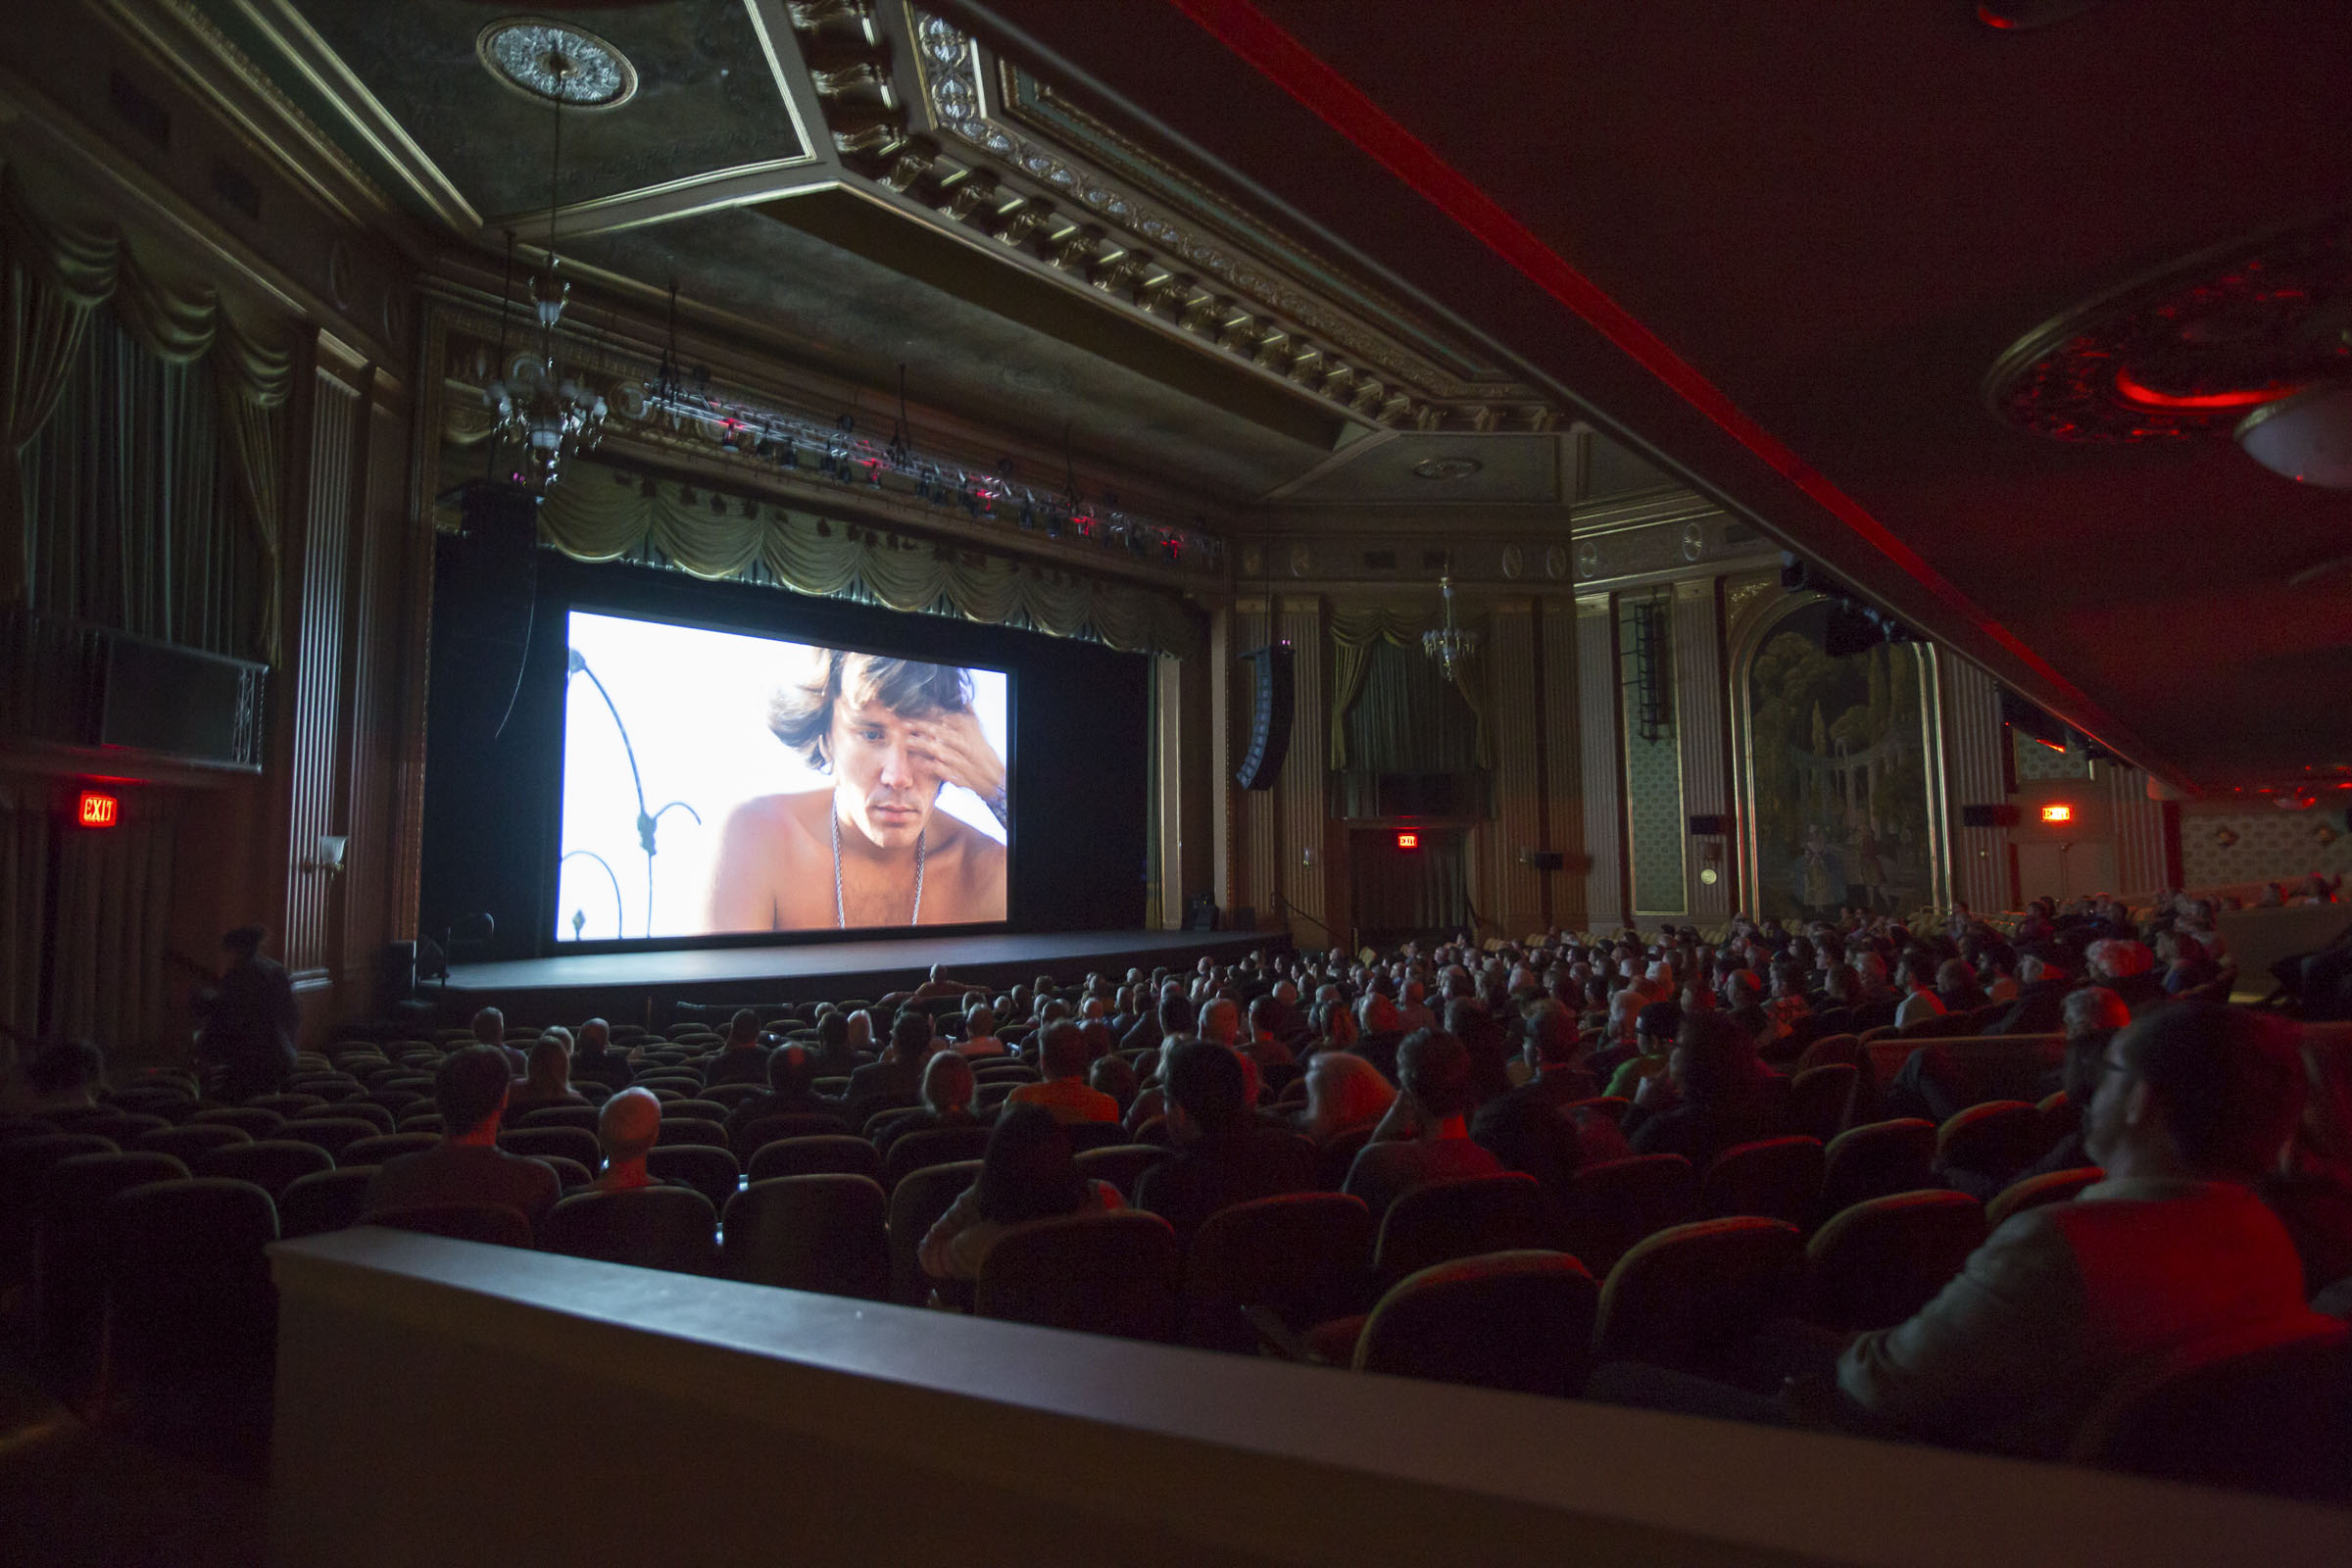 Audience in a theatre watching a movie on the screen